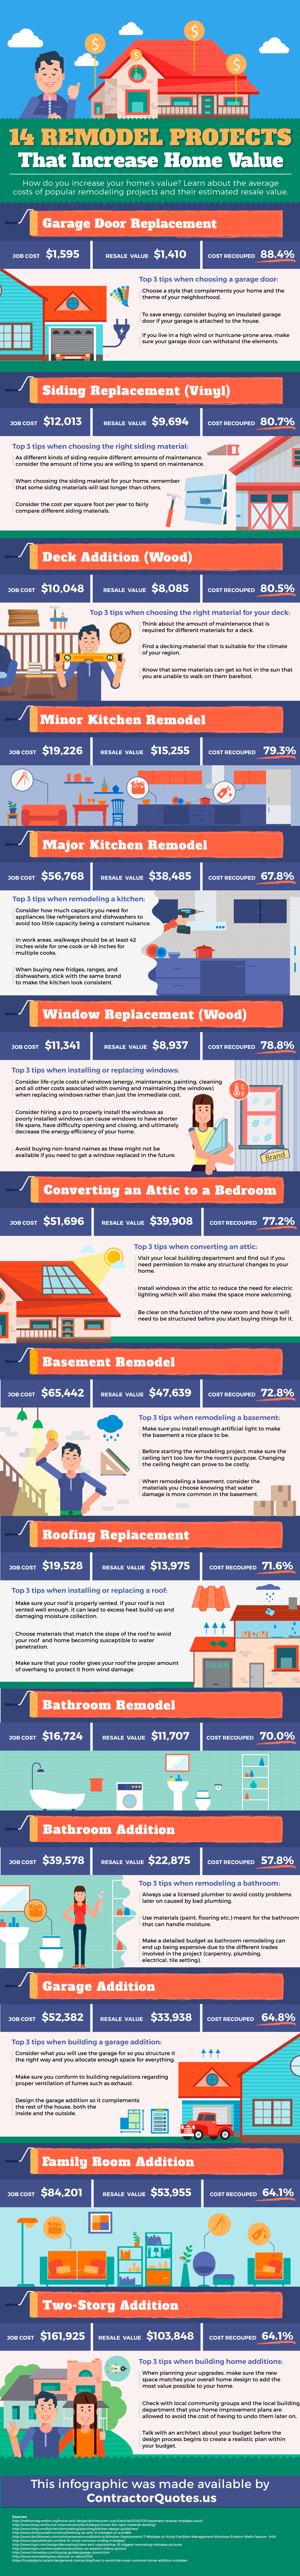 Remodeling that Increase your Home Value